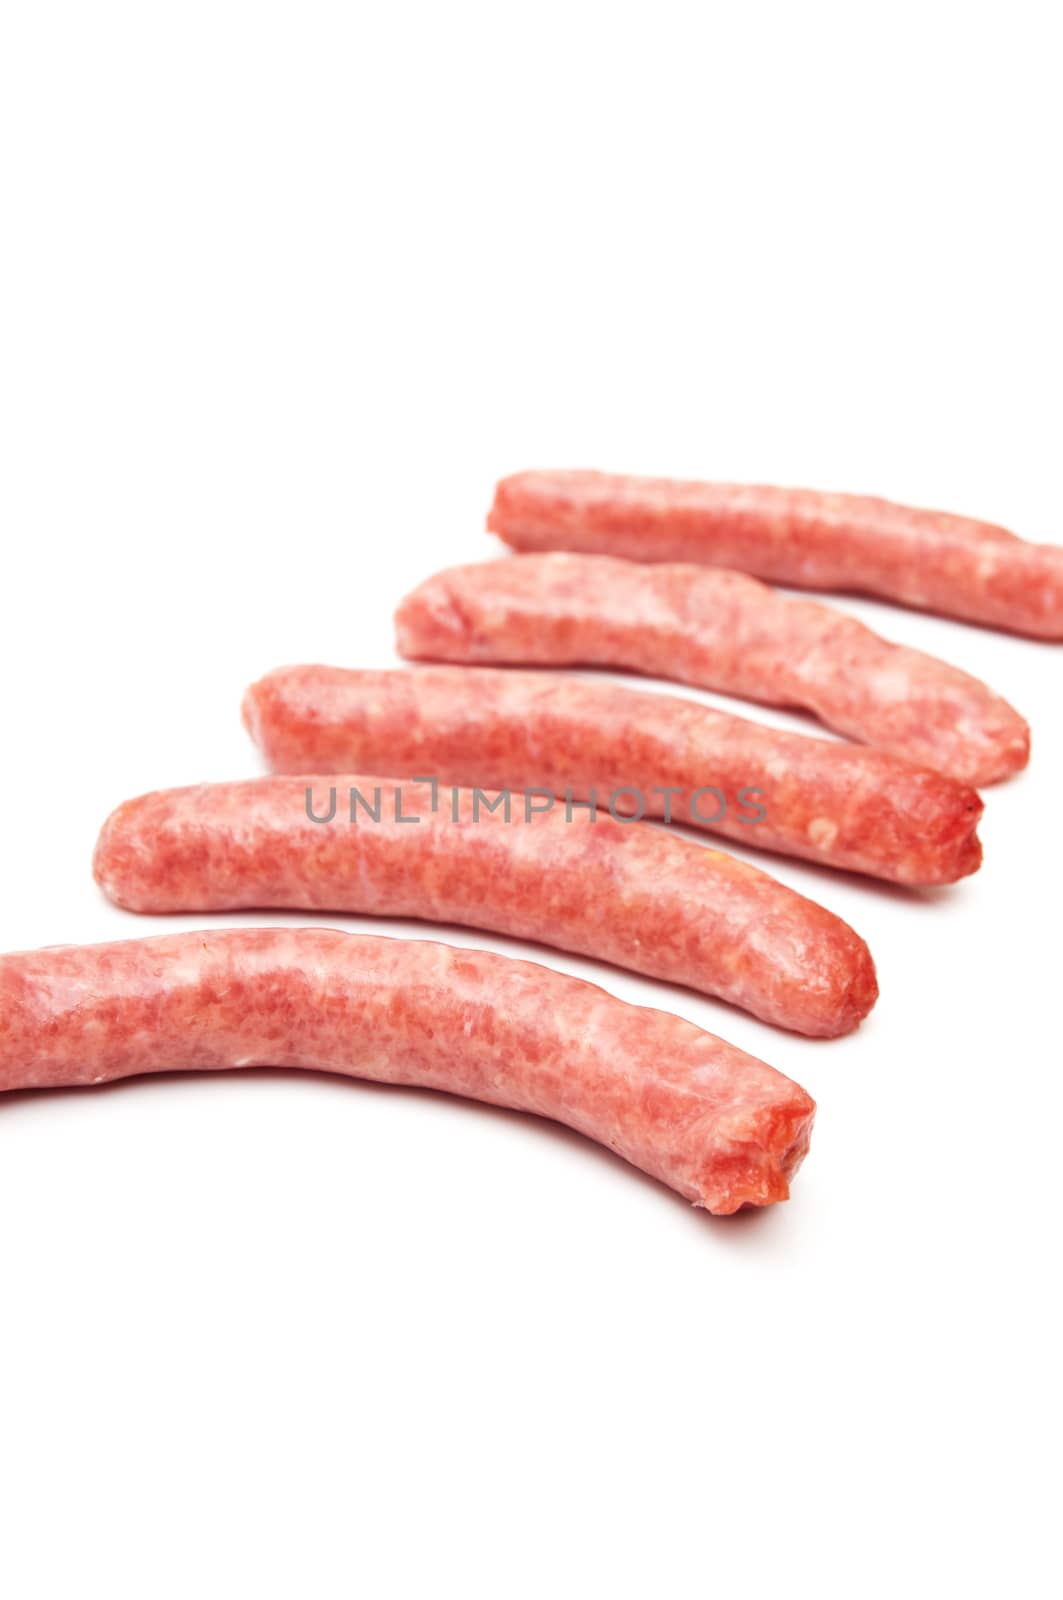 pork sausages on a white background